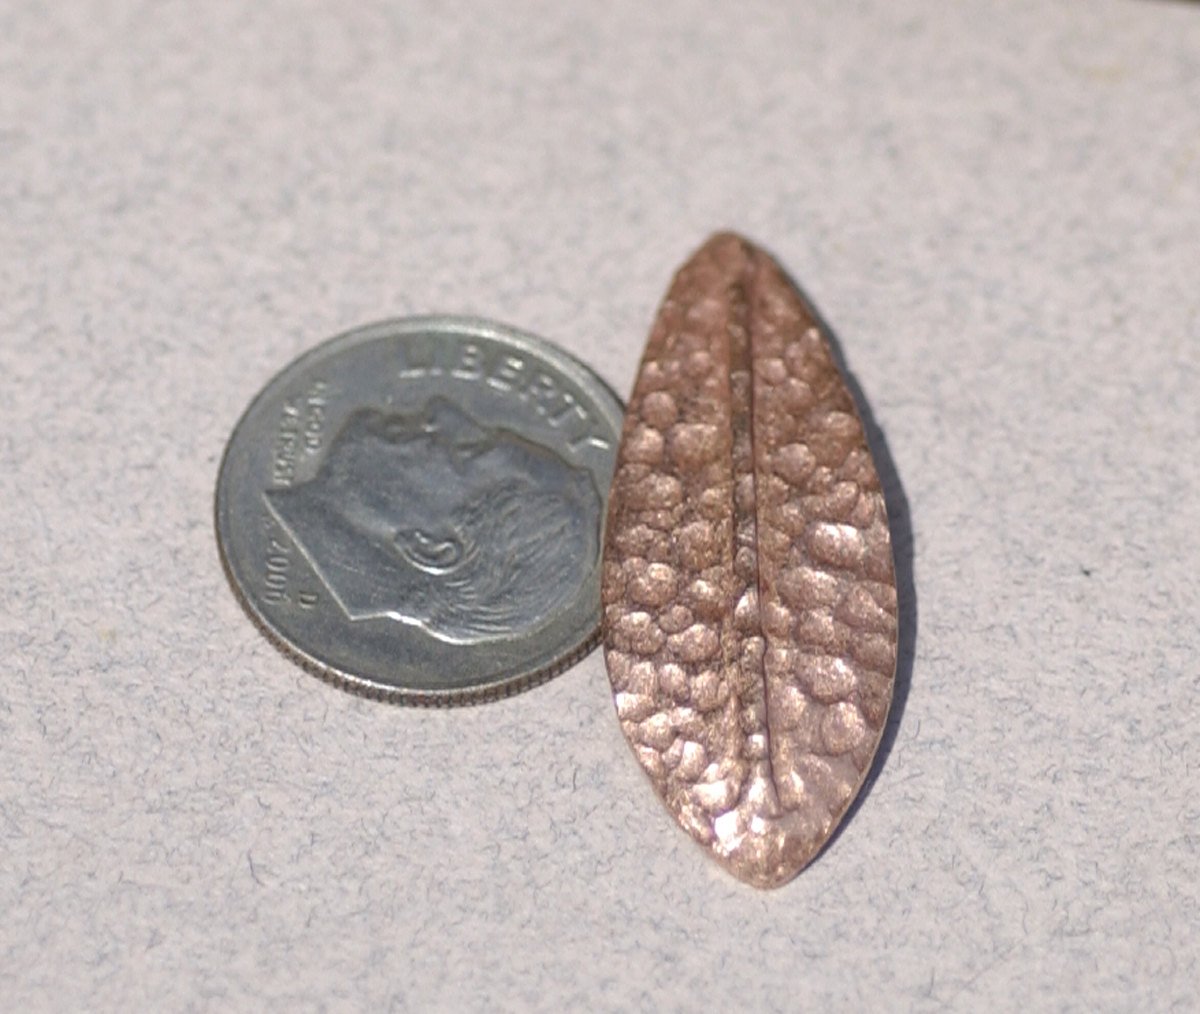 Copper Shapes Blank- Hammered Textured Leaf - Leaves - Tree Fall Greenery Leaf 3D 30mm x 12mm with Hole Shape Blanks